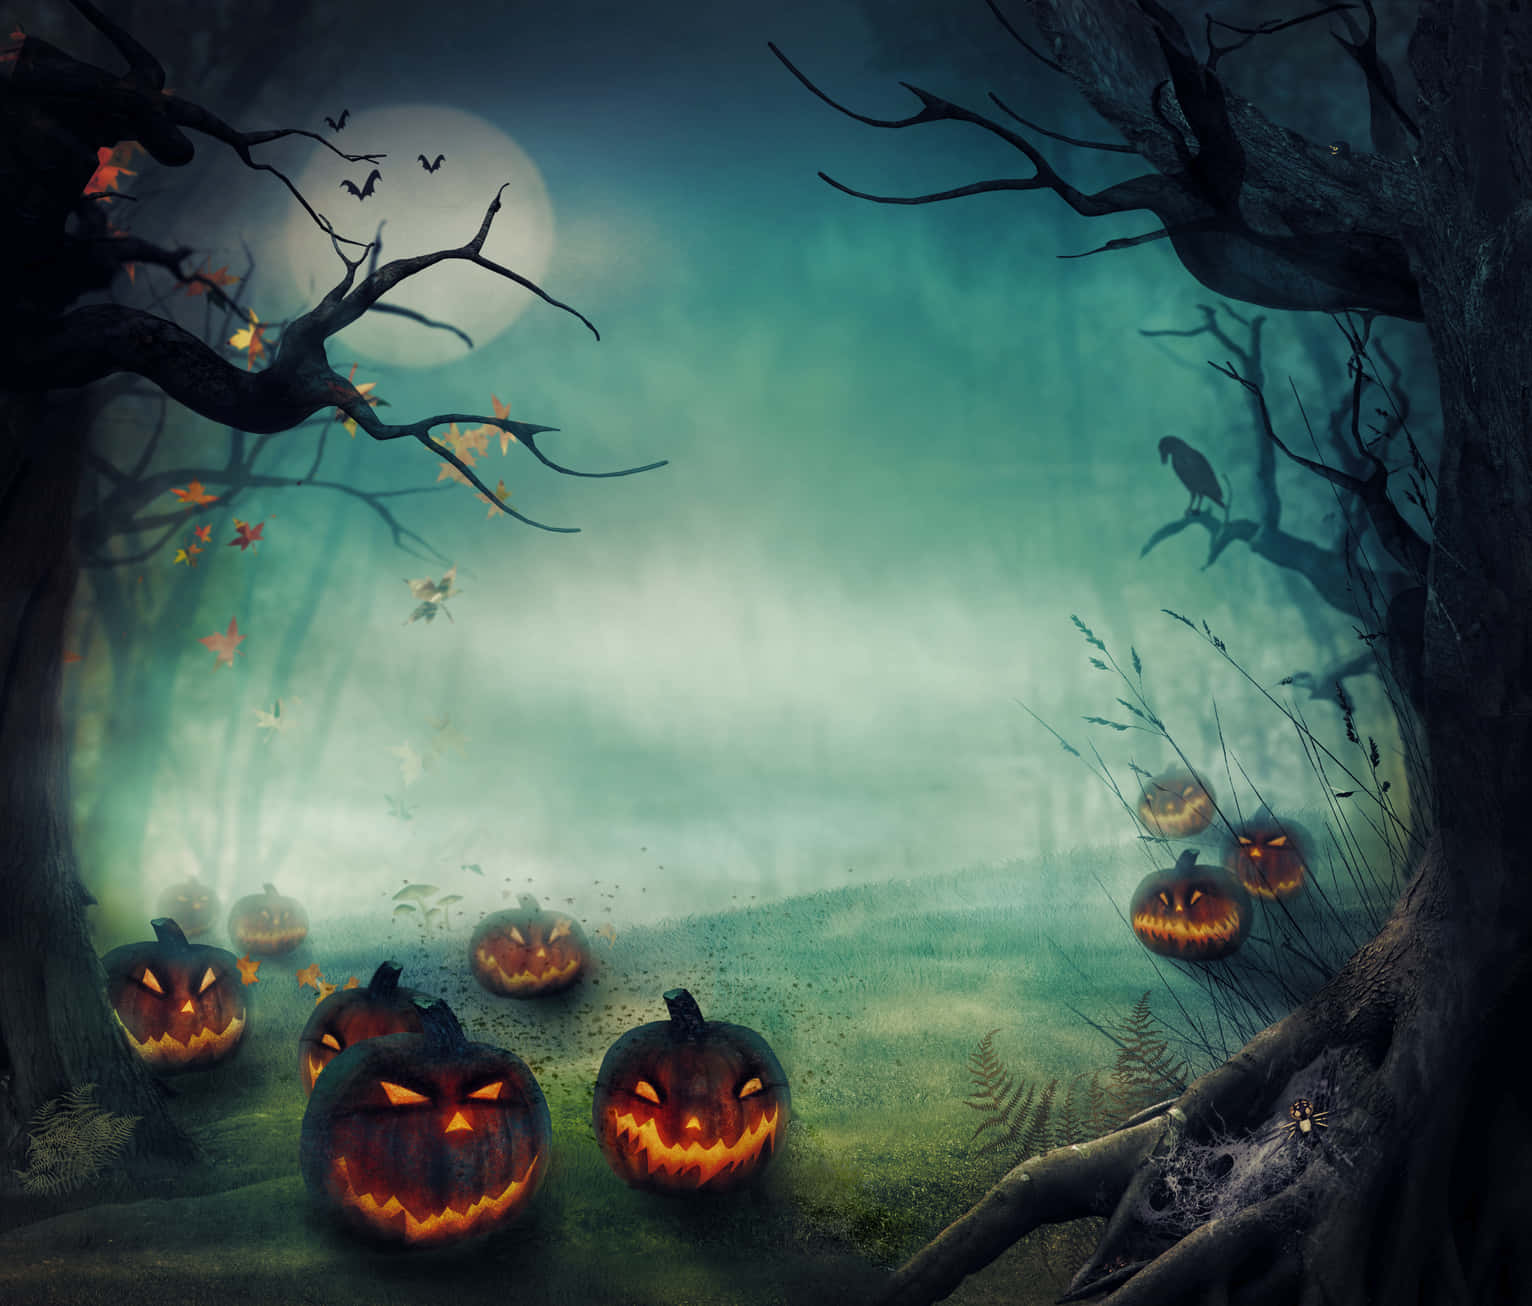 Get ready to be spooked this Halloween! Wallpaper